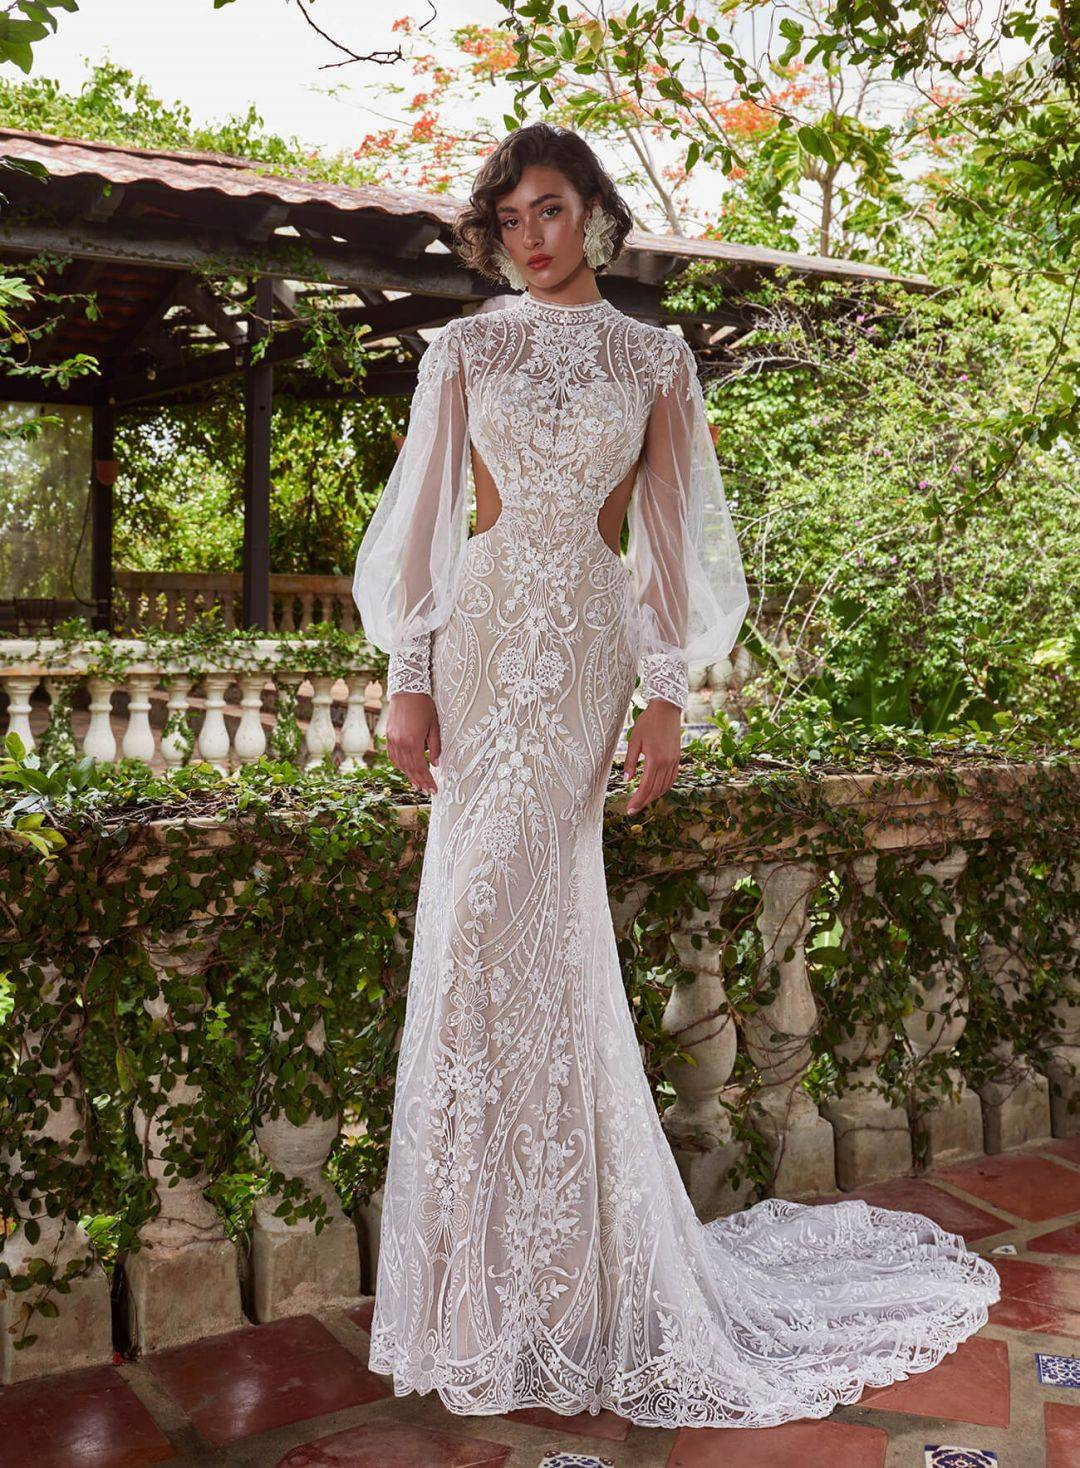 Backless high neckline lace country boho sheath silhouette wedding gown with long sleeves